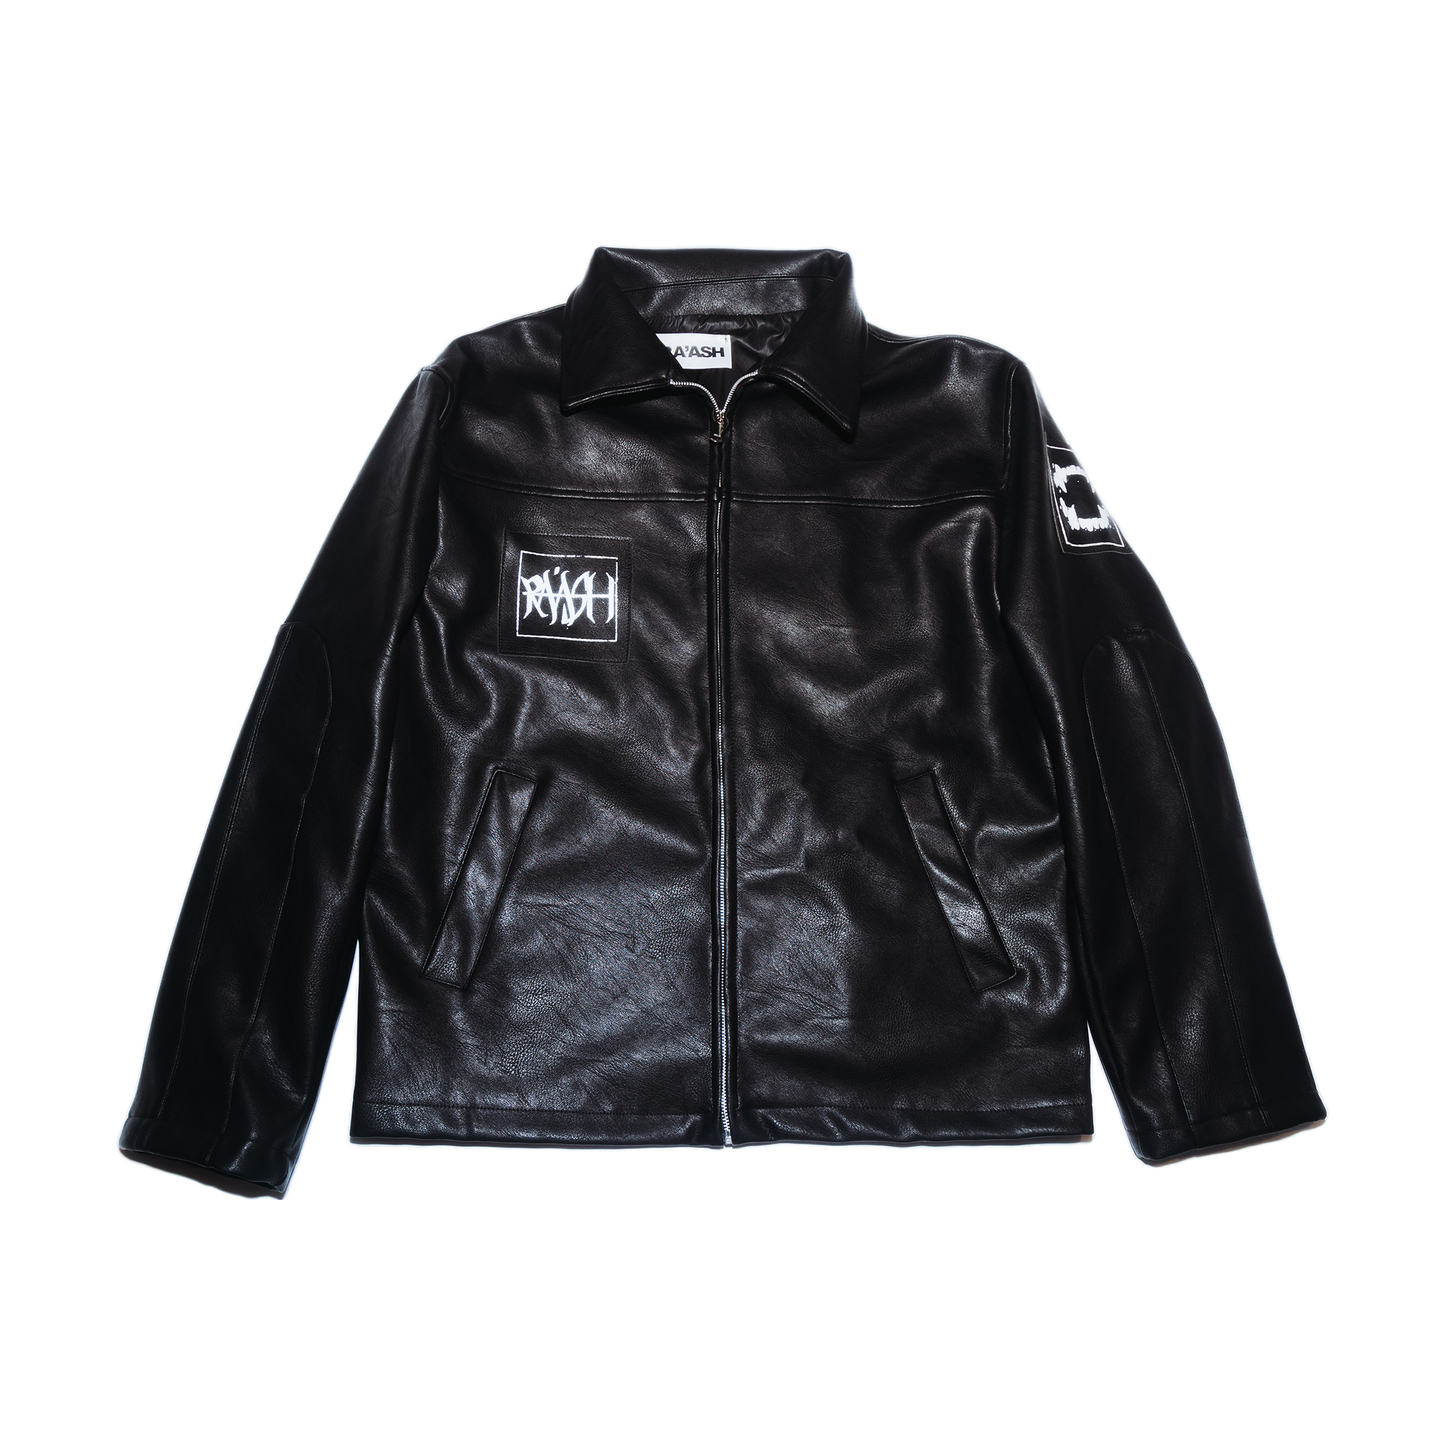 Chaos Is Order Jacket